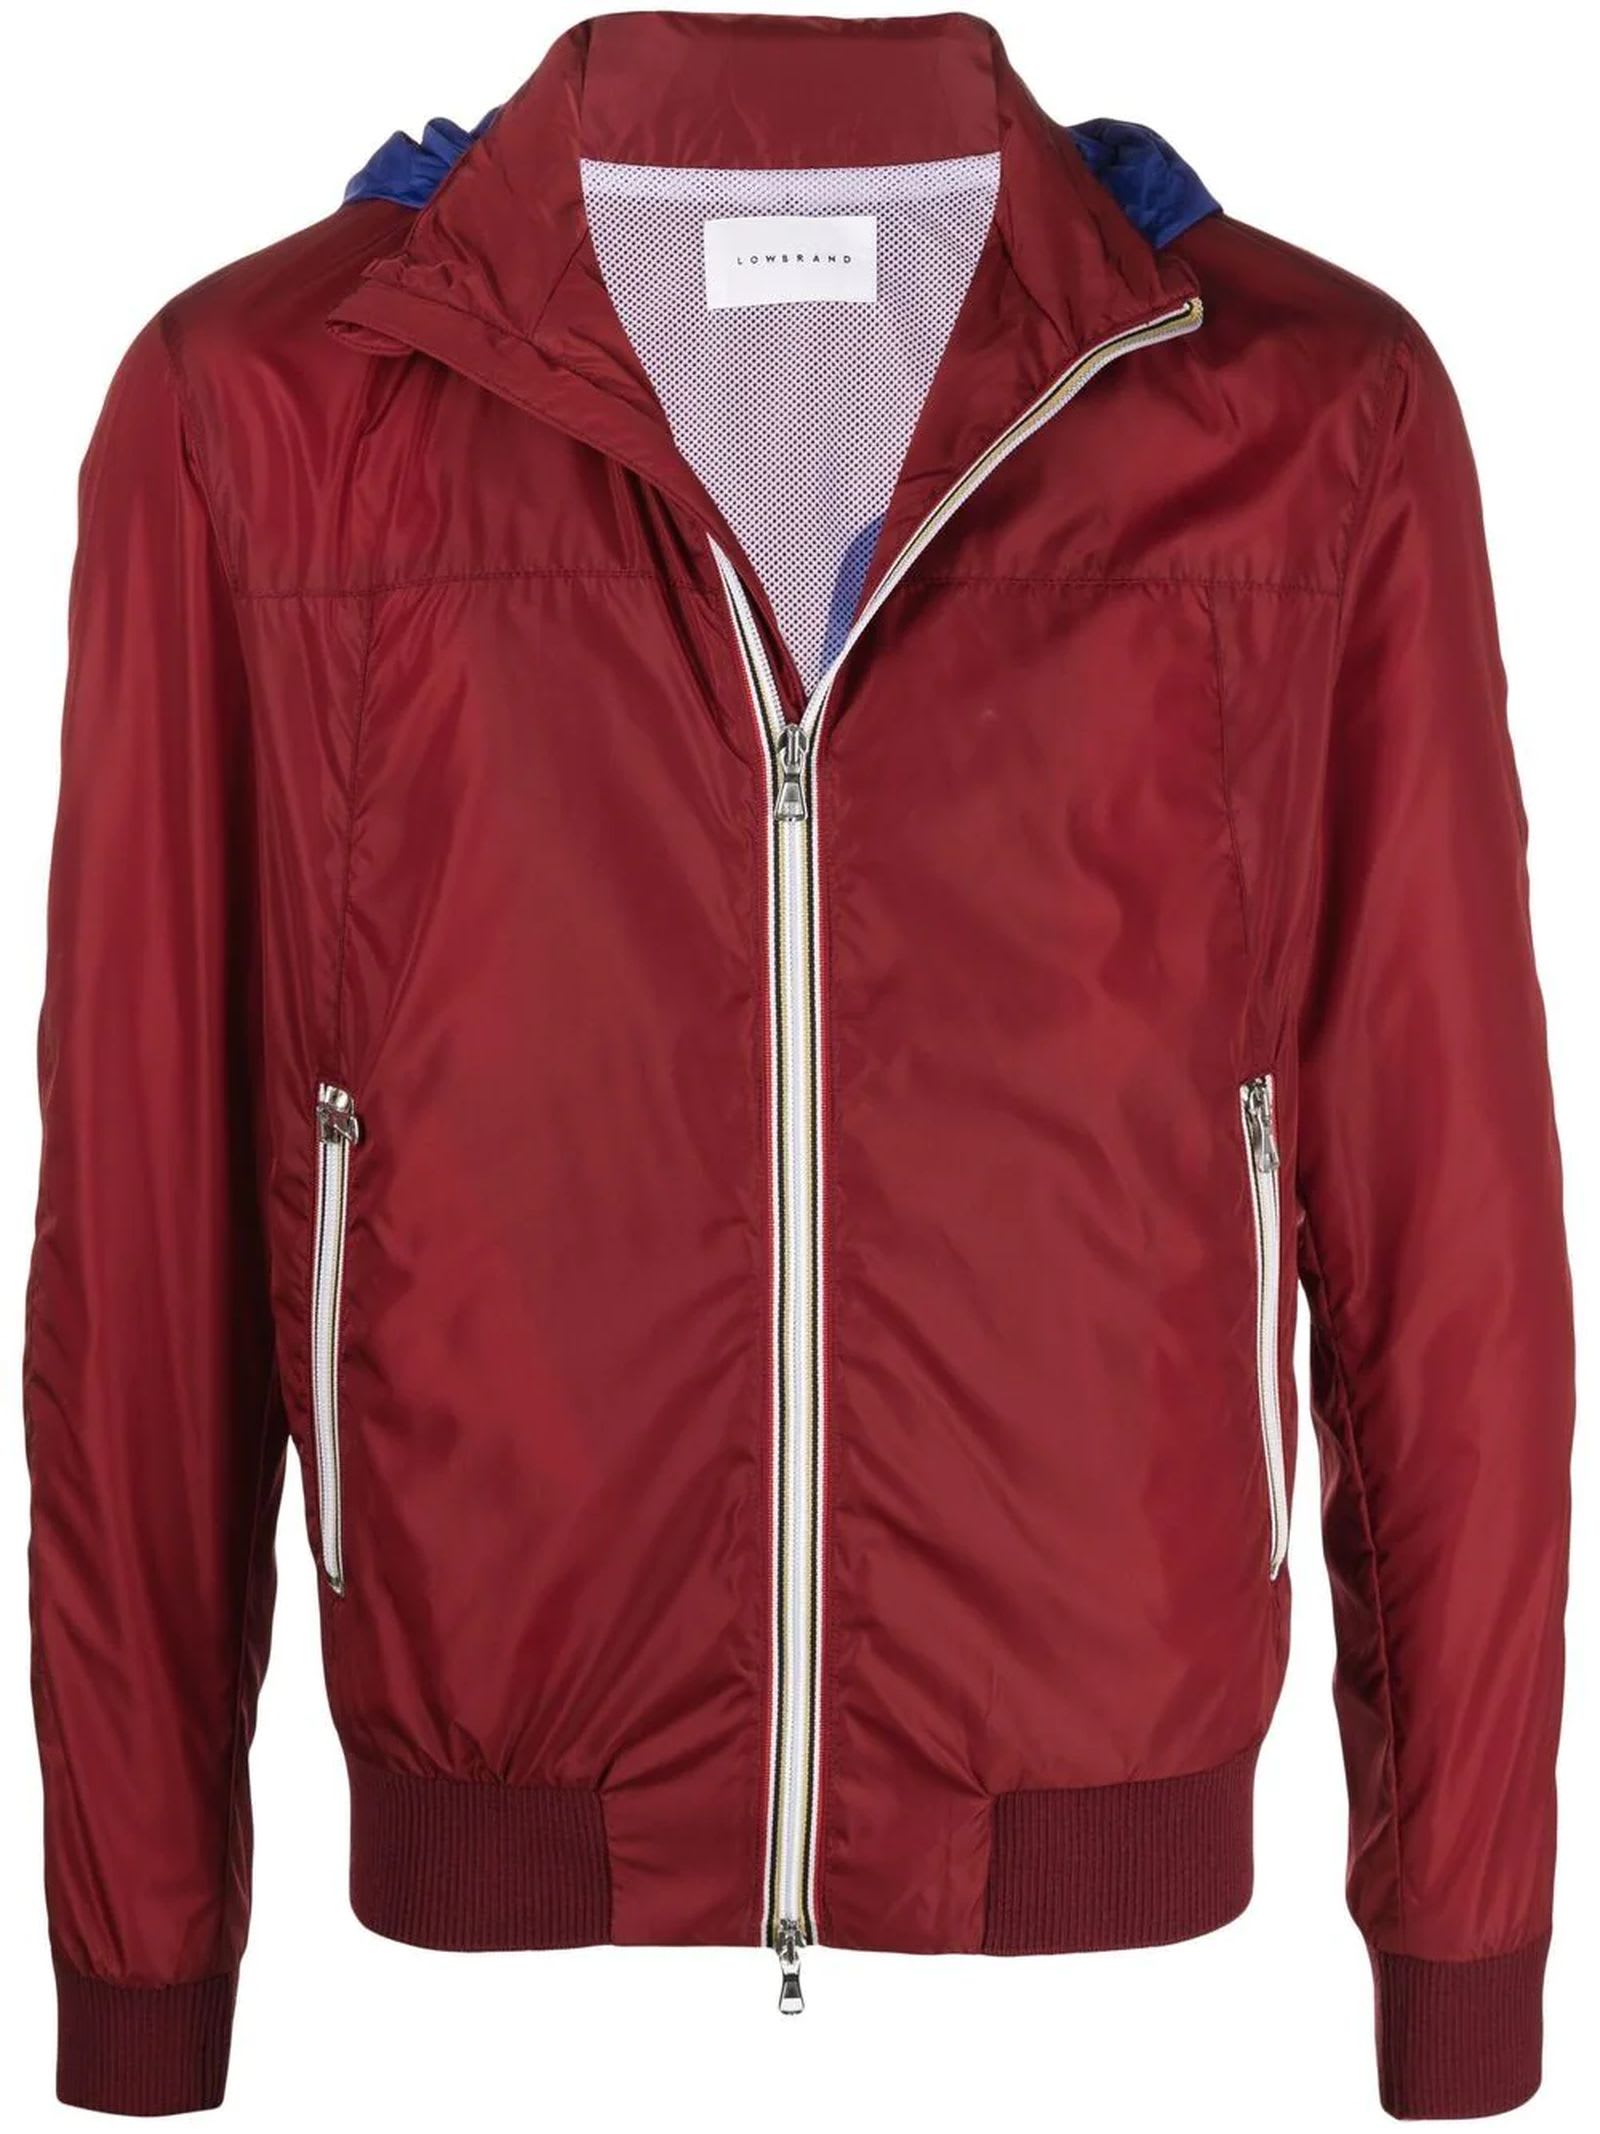 Low Brand Scarlet Red Bomber